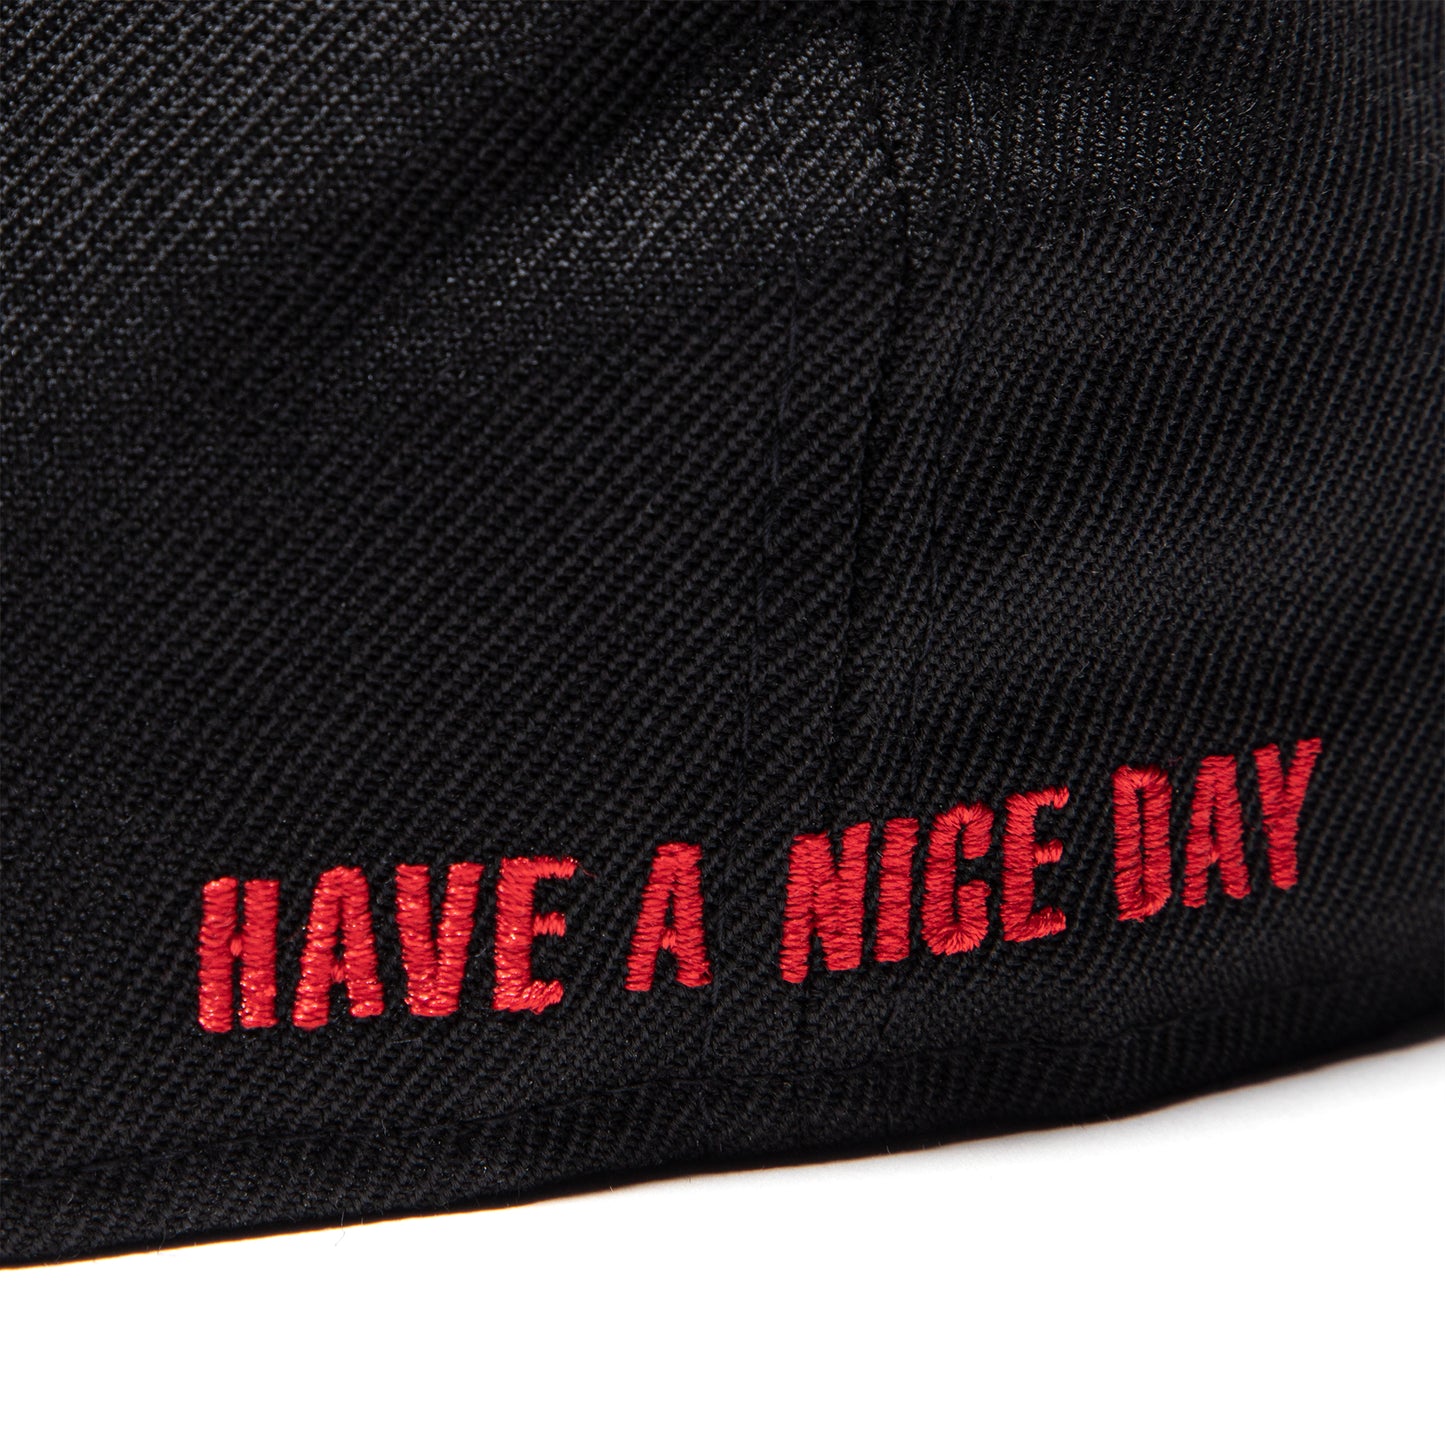 New Era Rose Thank You Fitted Cap (Black/Red)